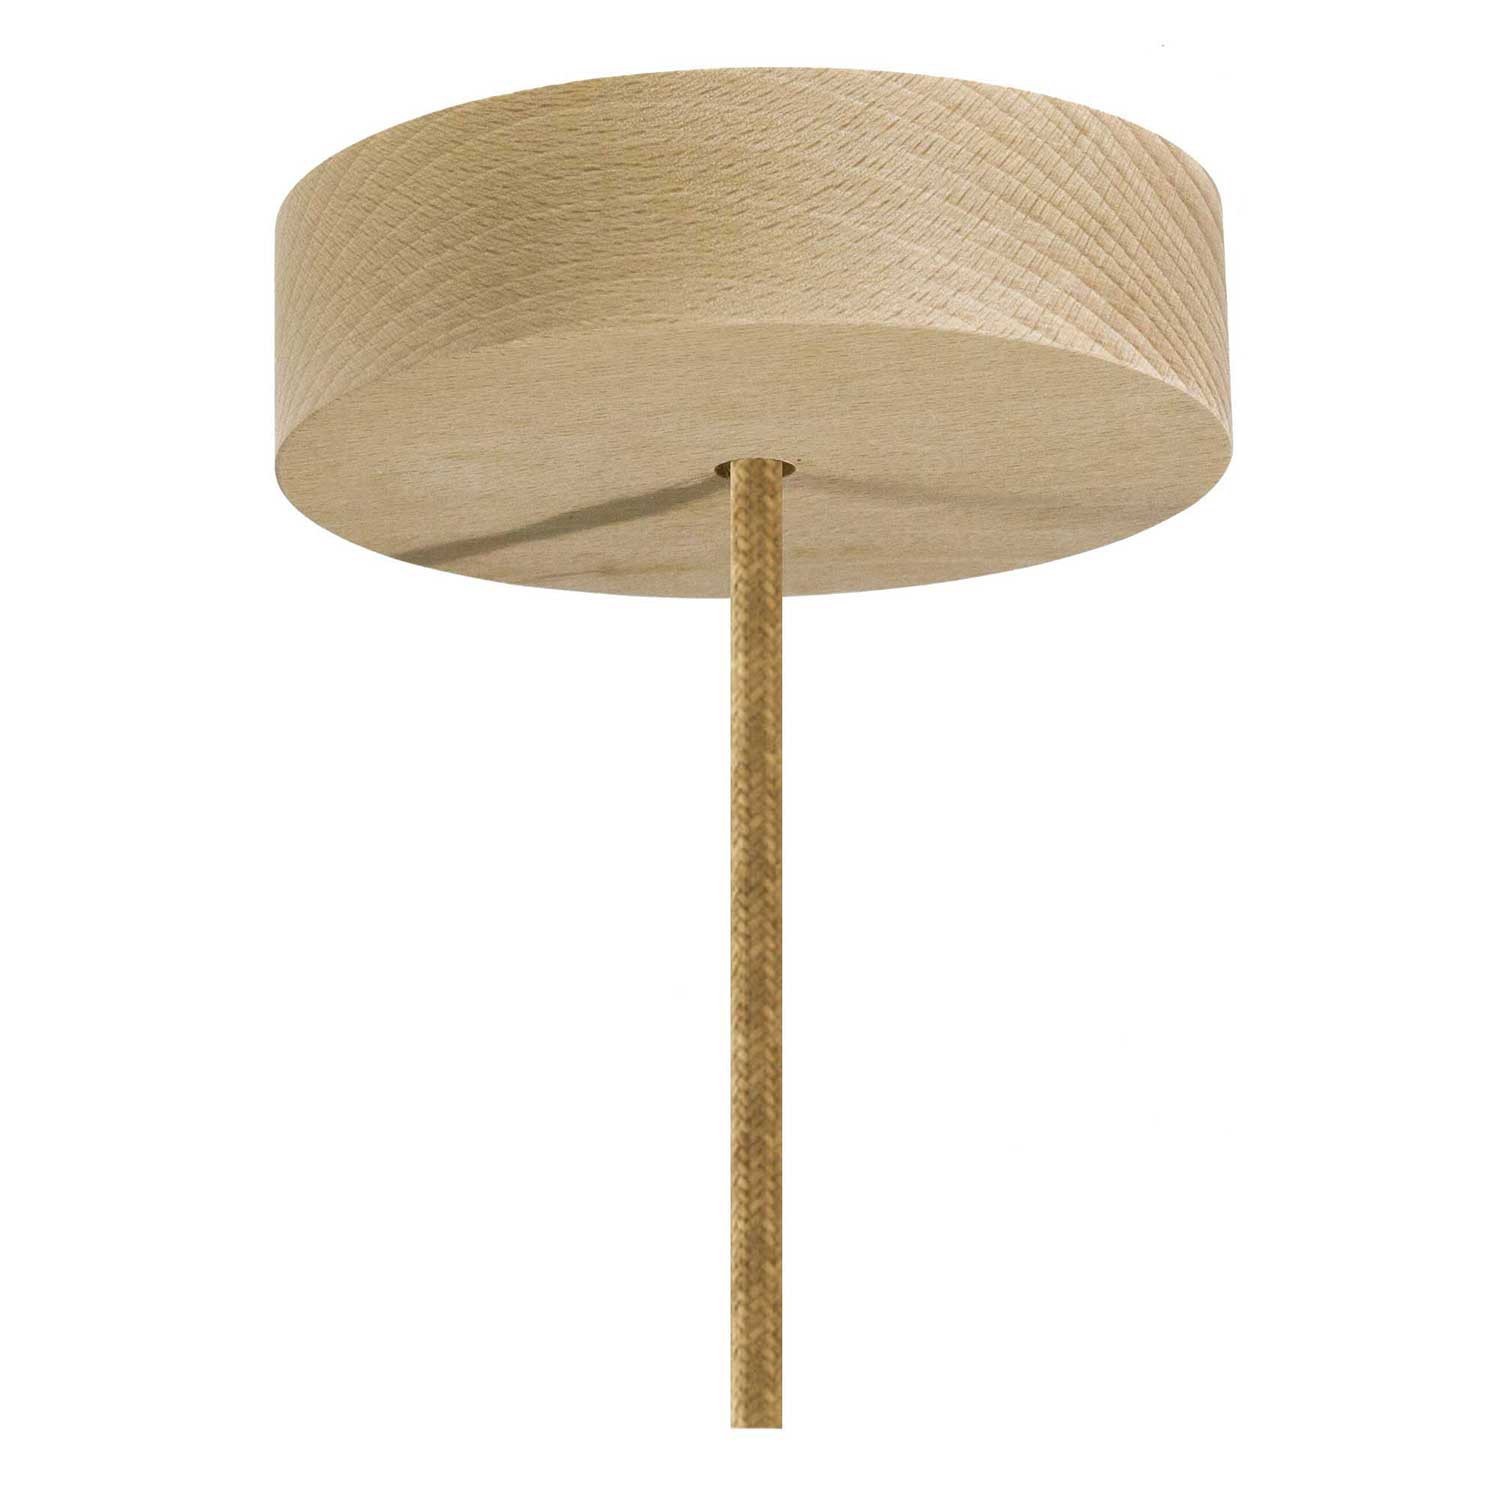 Pendant lamp with textile cable, raffia Cylinder lampshade and metal details - Made in Italy